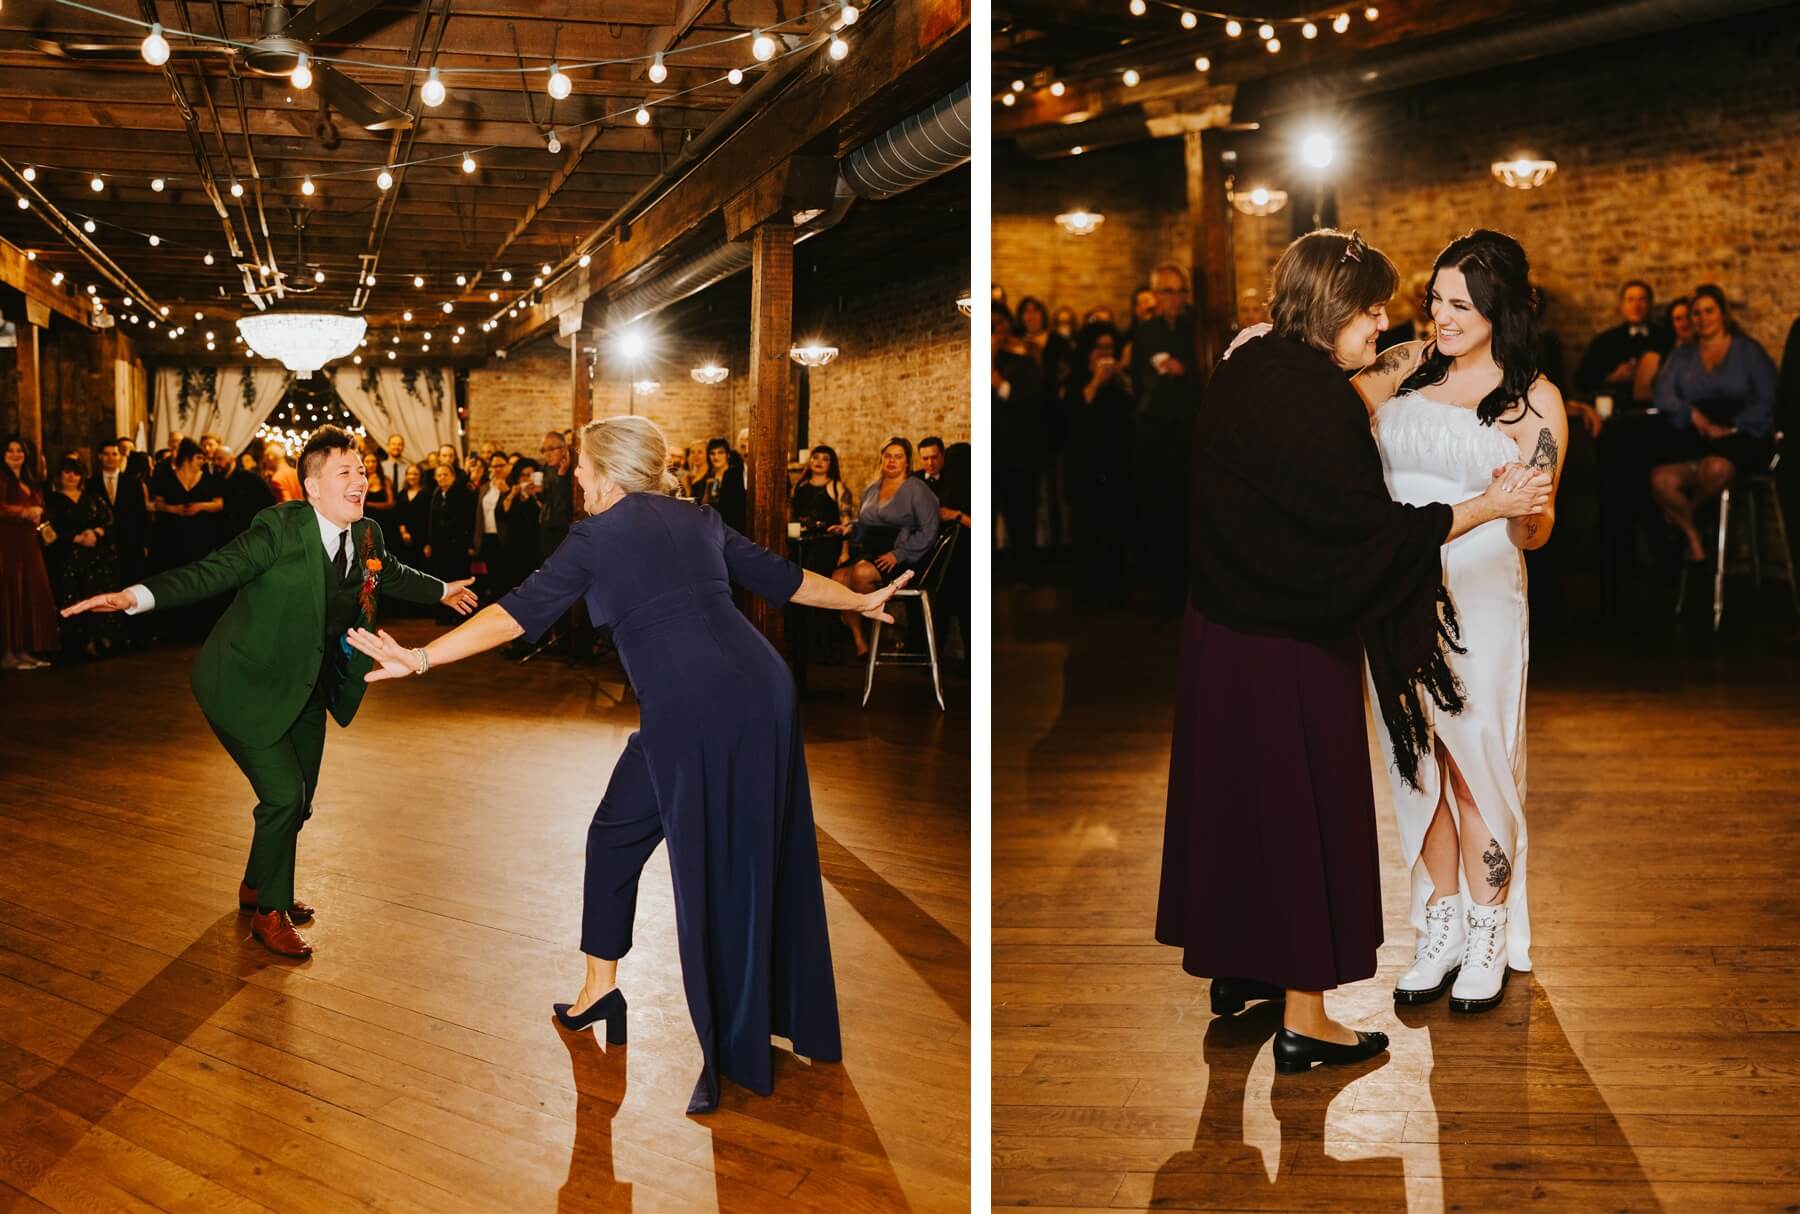 Couple dancing with their moms at wedding